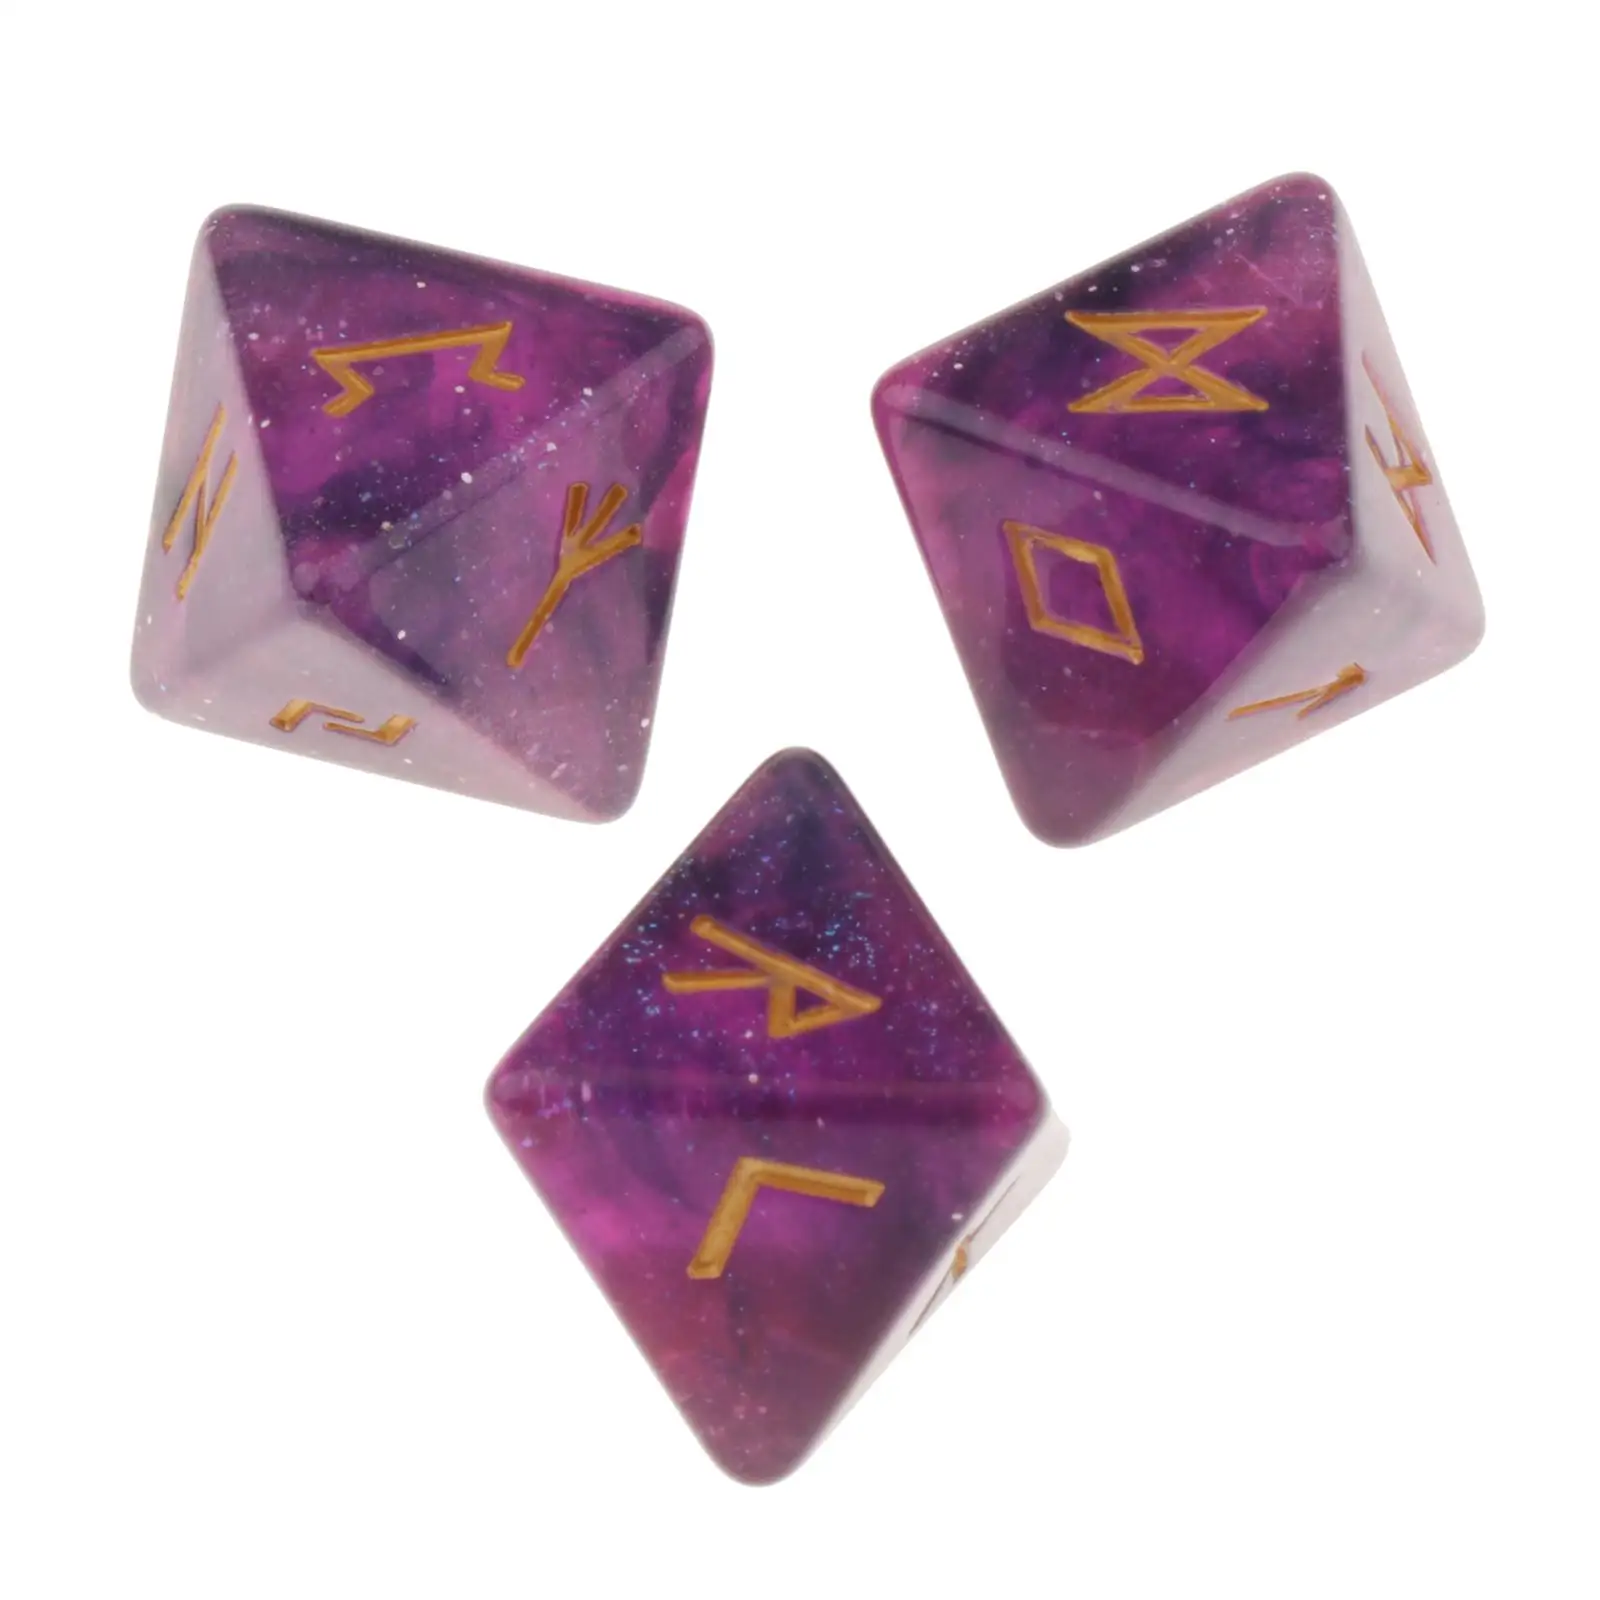 Starry Star Resin Tarot Divination Dice Good Polishing Effect for Game Dice